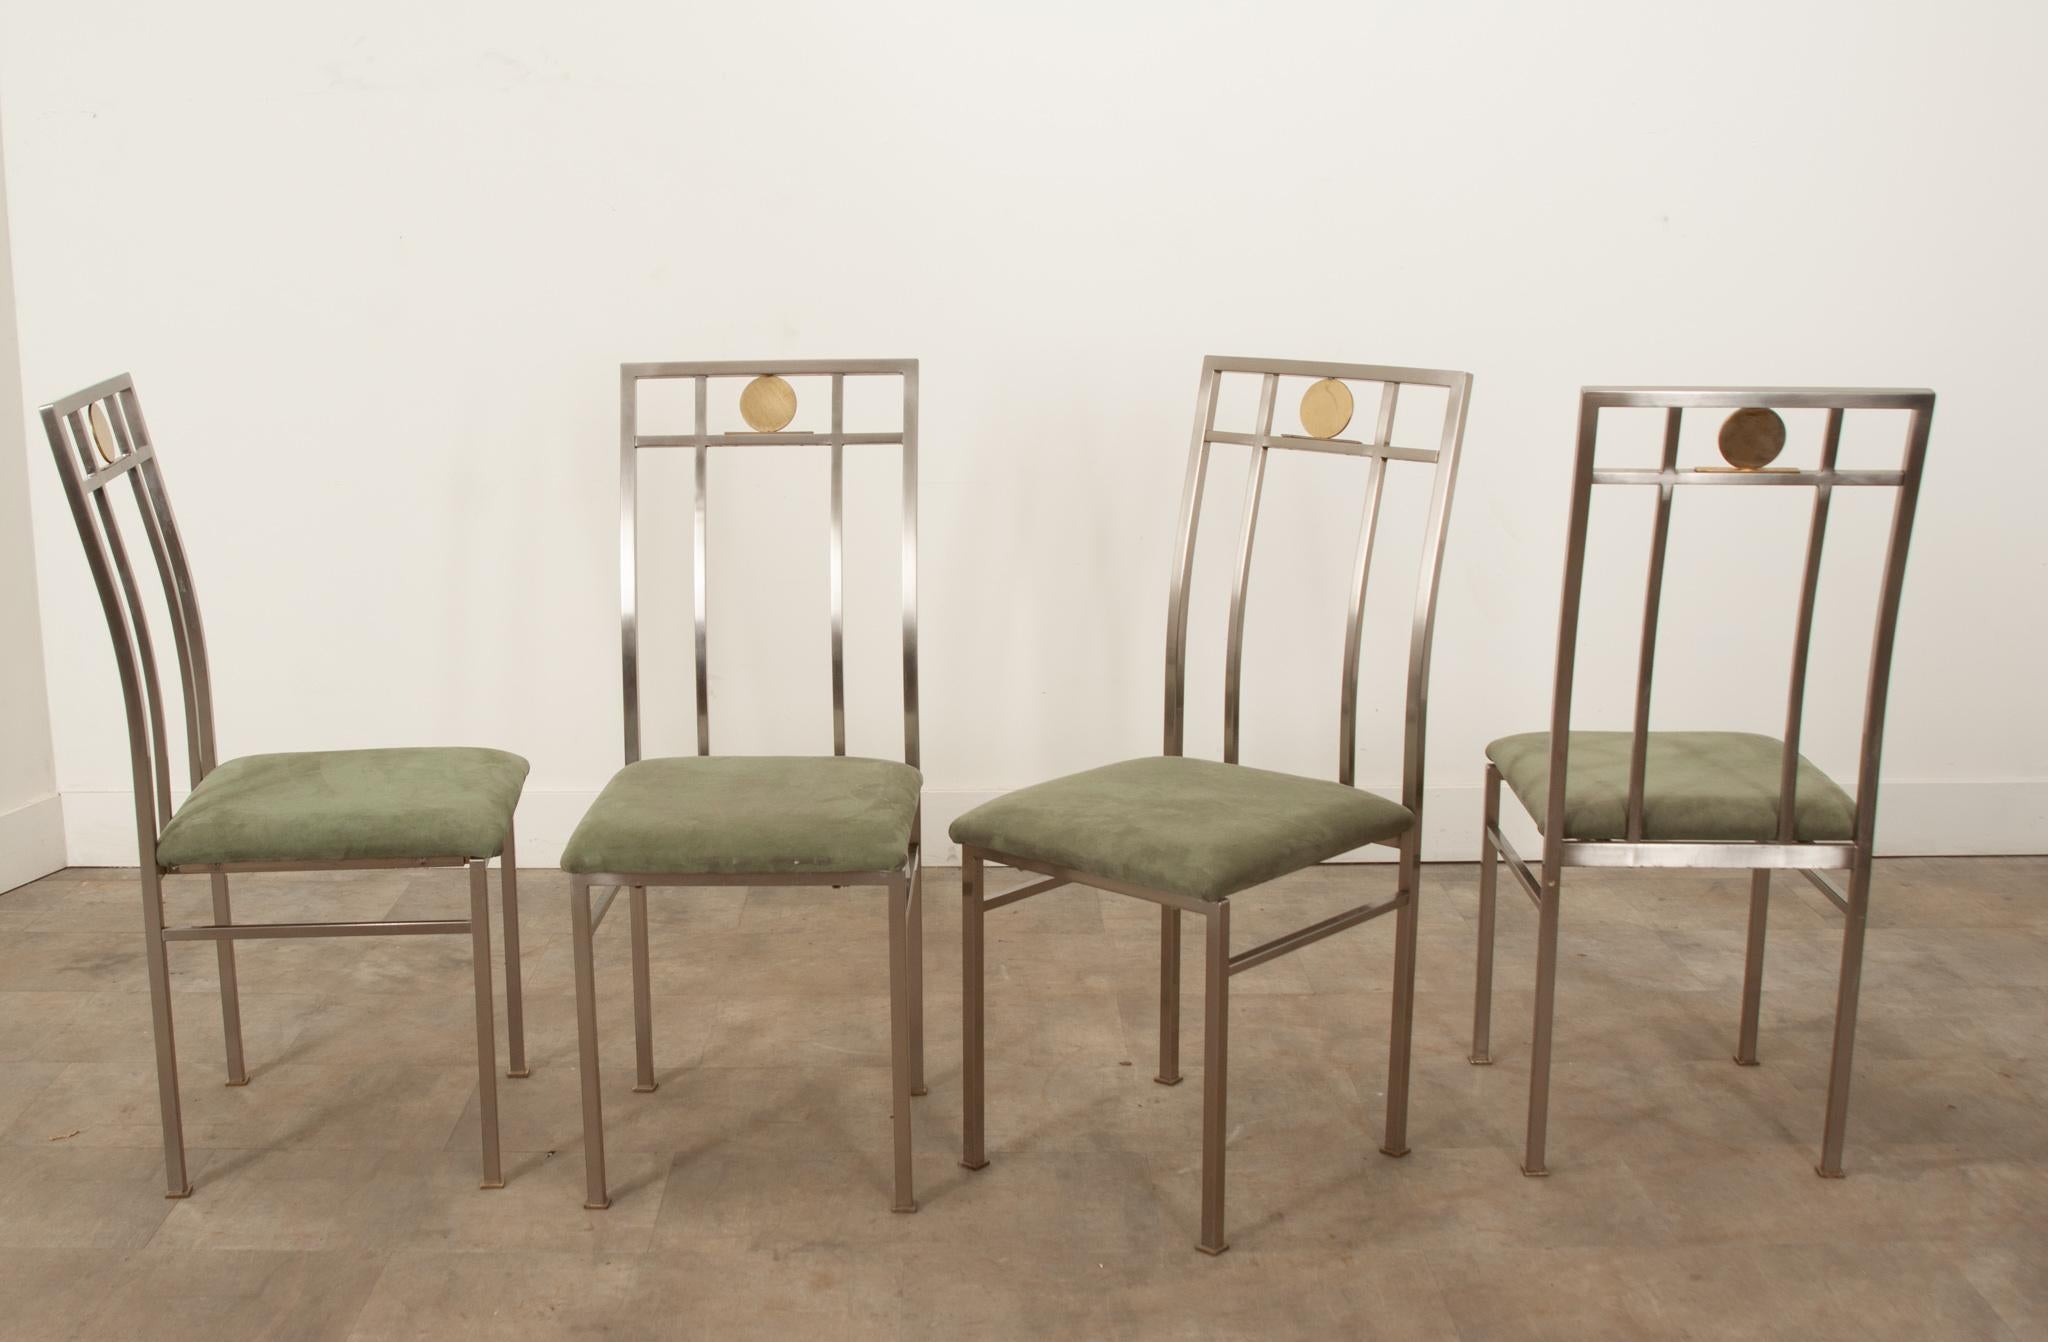 A fabulous set of four Mid-Century modern dining chairs made in France circa 1960. These beautiful chairs are in excellent condition and feature gilded silver and gold accented metal frames that are extremely sturdy while showcasing a sleek